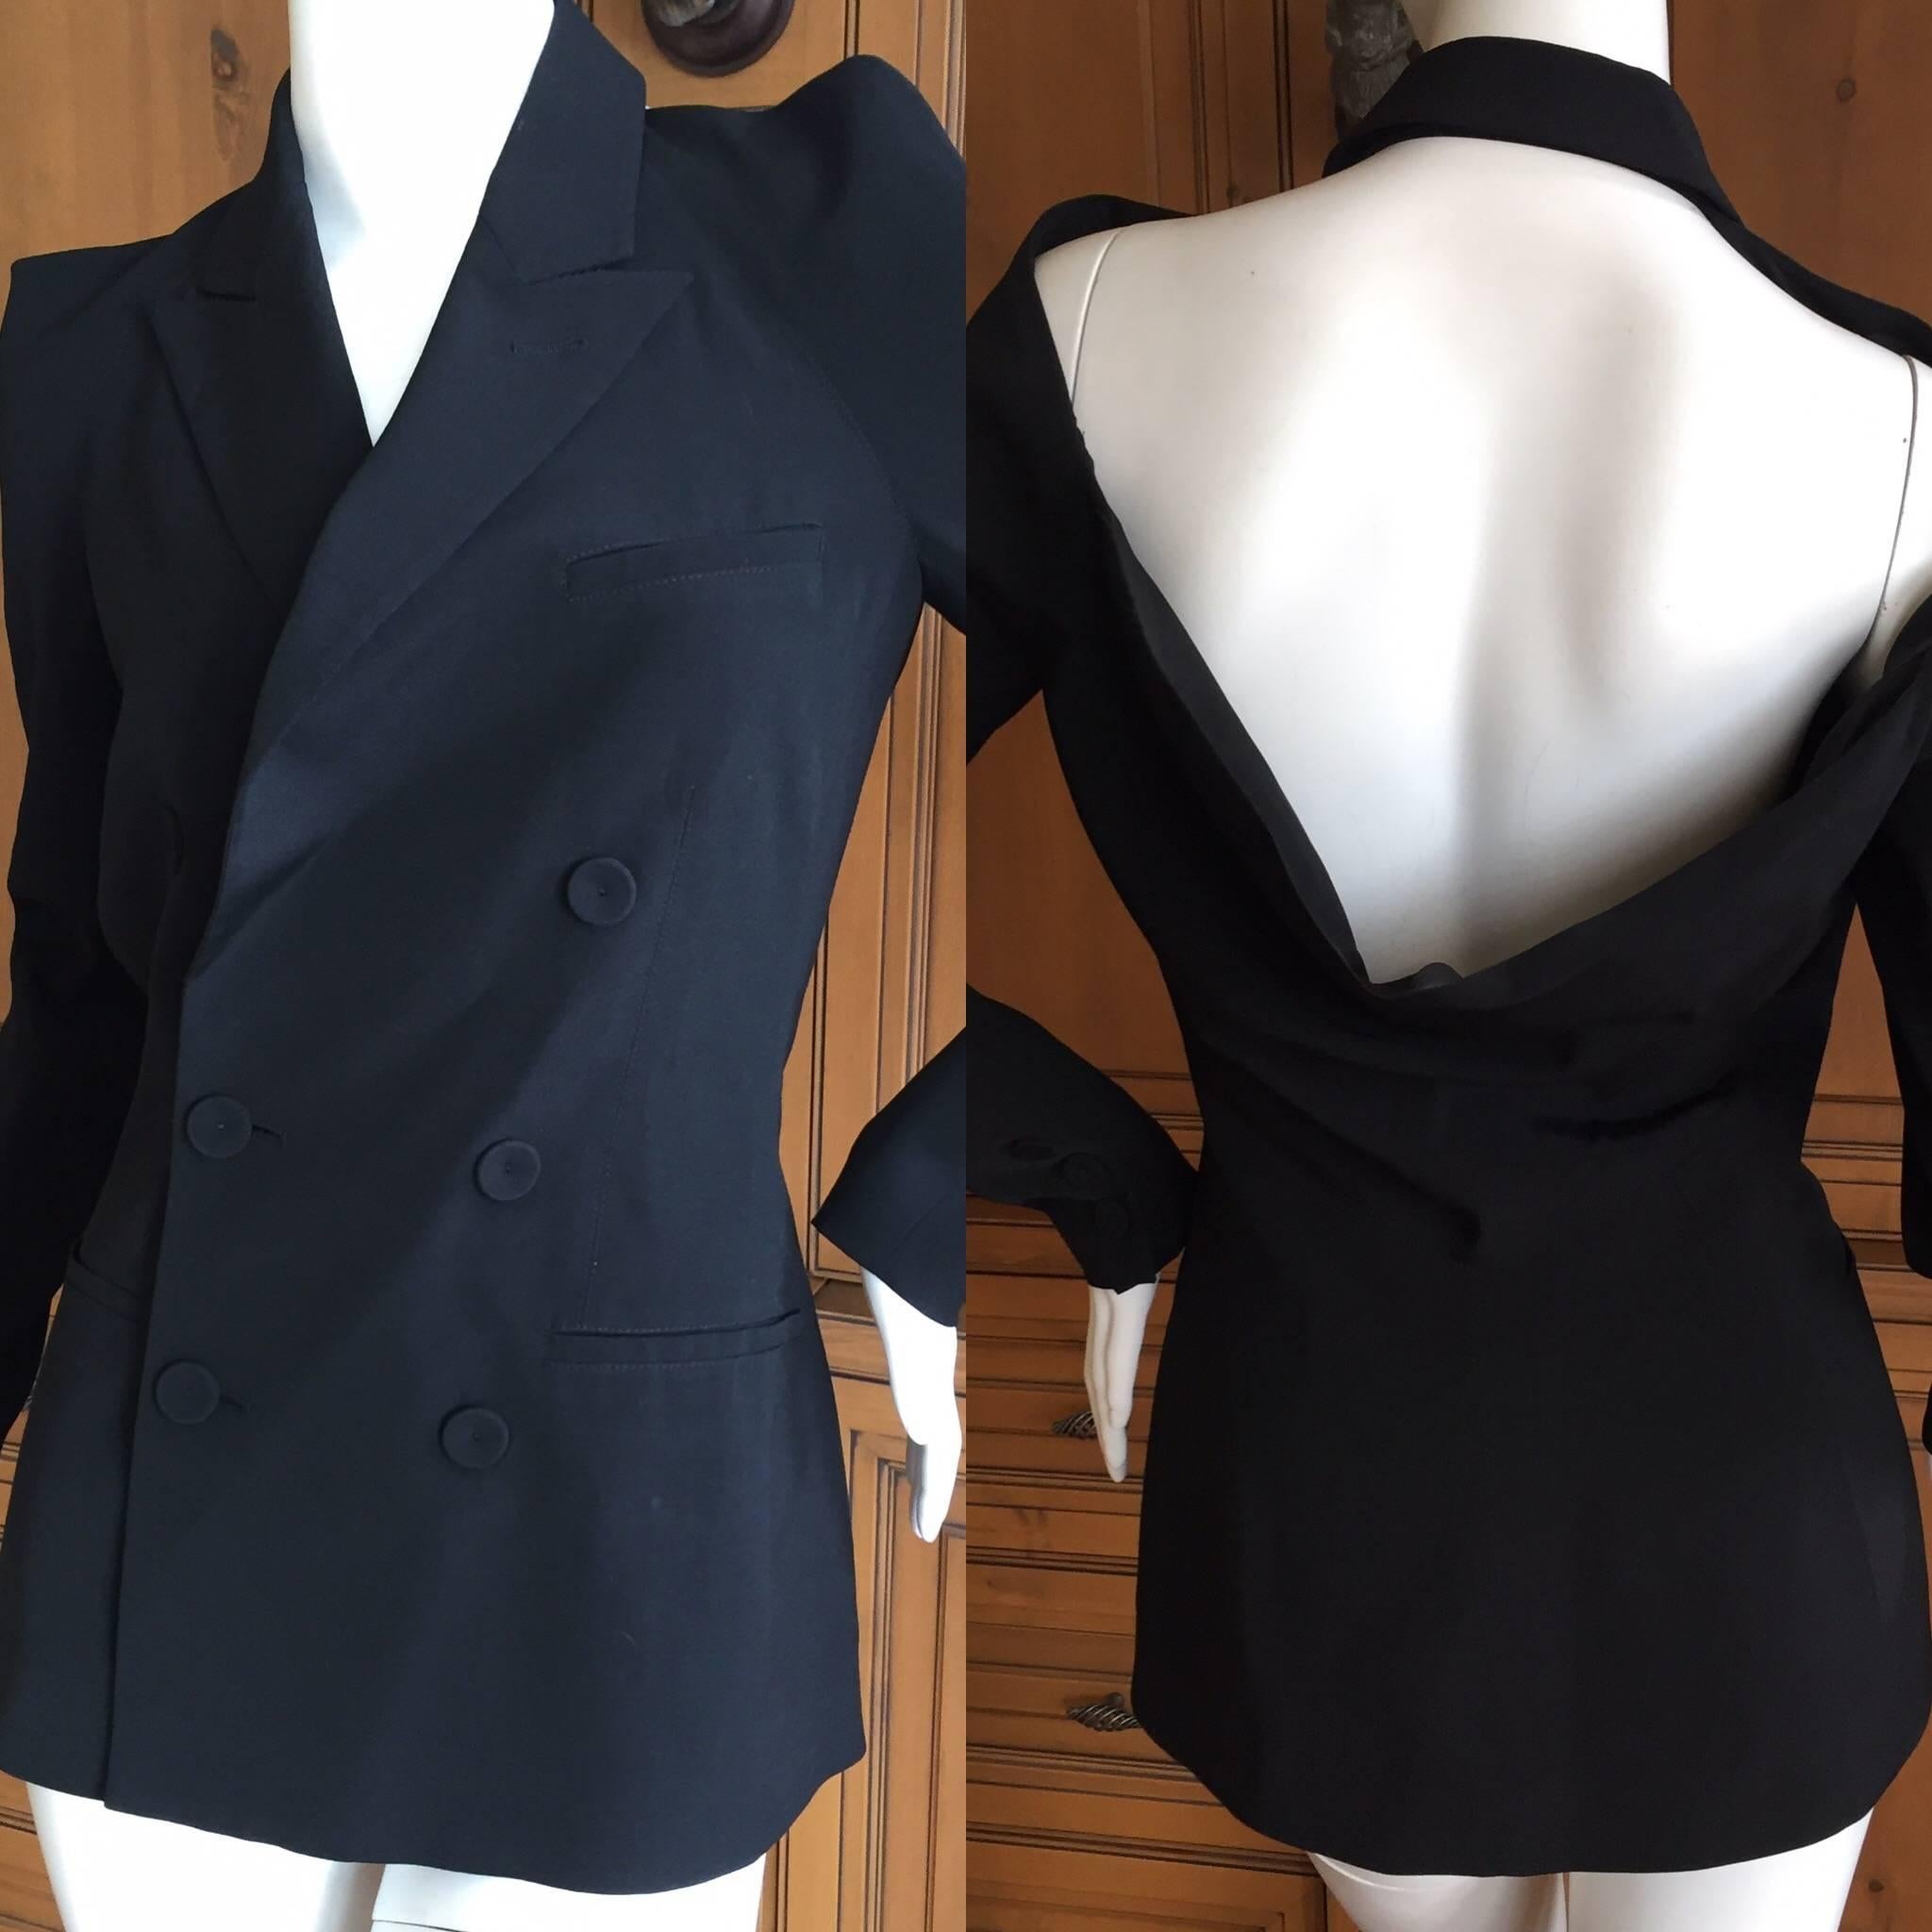 Wonderful Jean Paul Gaultier 1980's Backless Tuxedo Jacket. 
From the front this is a traditional double breasted Tuxedo jacket, but with an exposed back, so chic.
Size 36
Bust 36